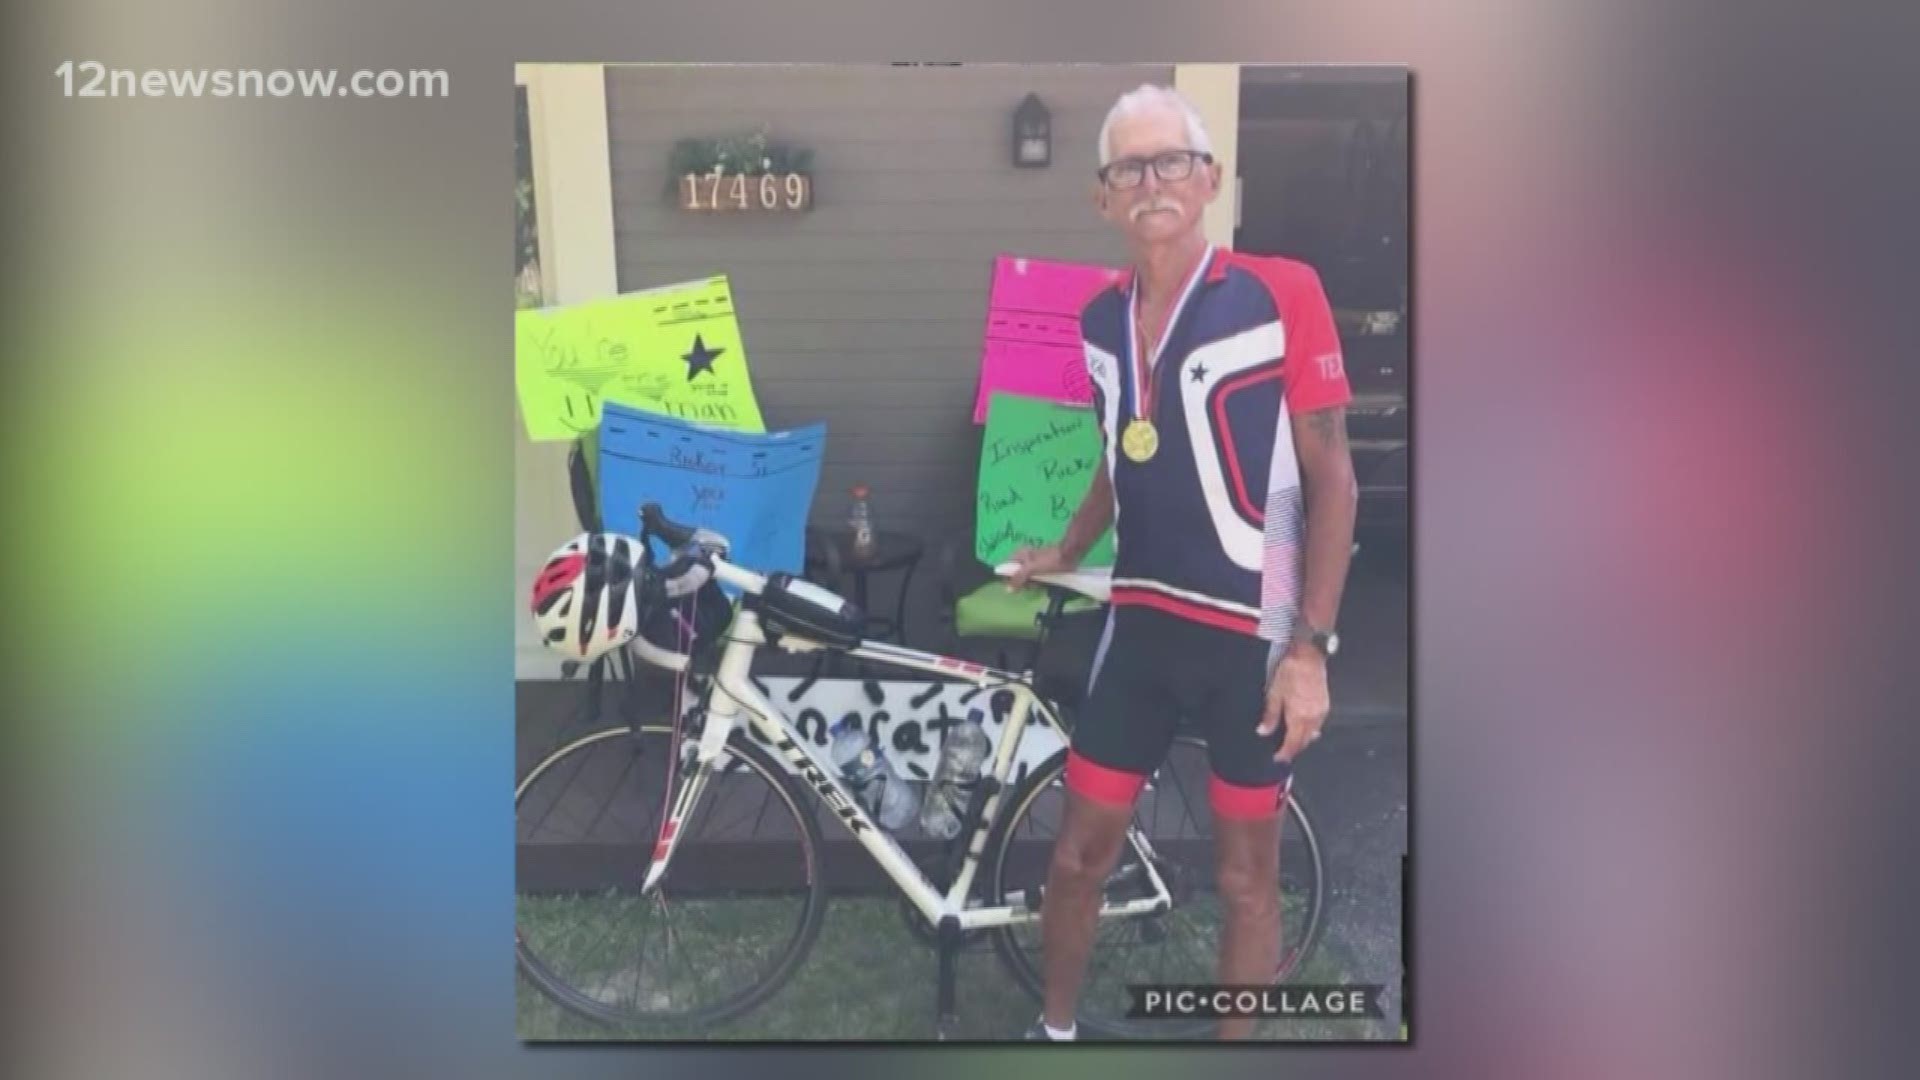 An Orange man rode his bicycle from Orange to Lakeville, Minnesota to visit his family